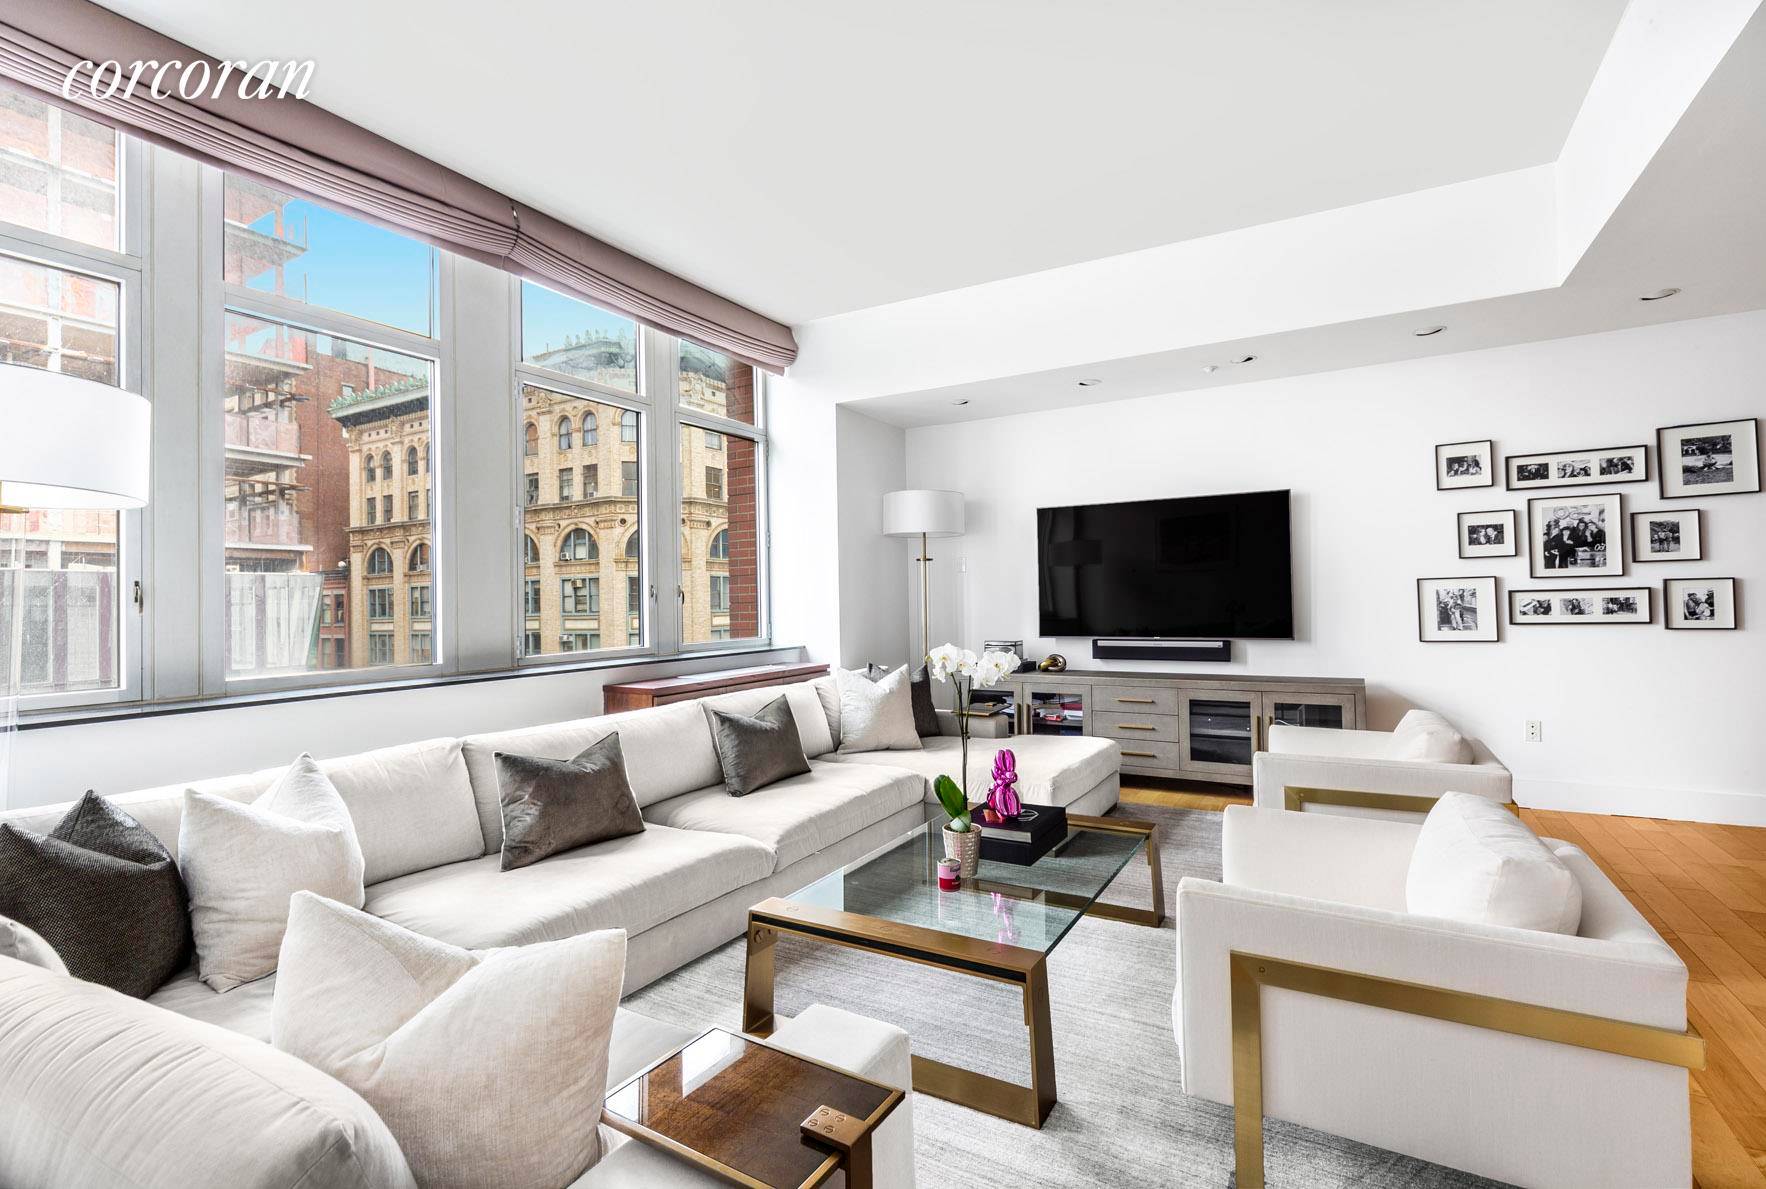 This 2 bedroom, 2 bath loft features gracious living spaces, custom details and tons of storage located in one of Soho's premier doorman condominiums.